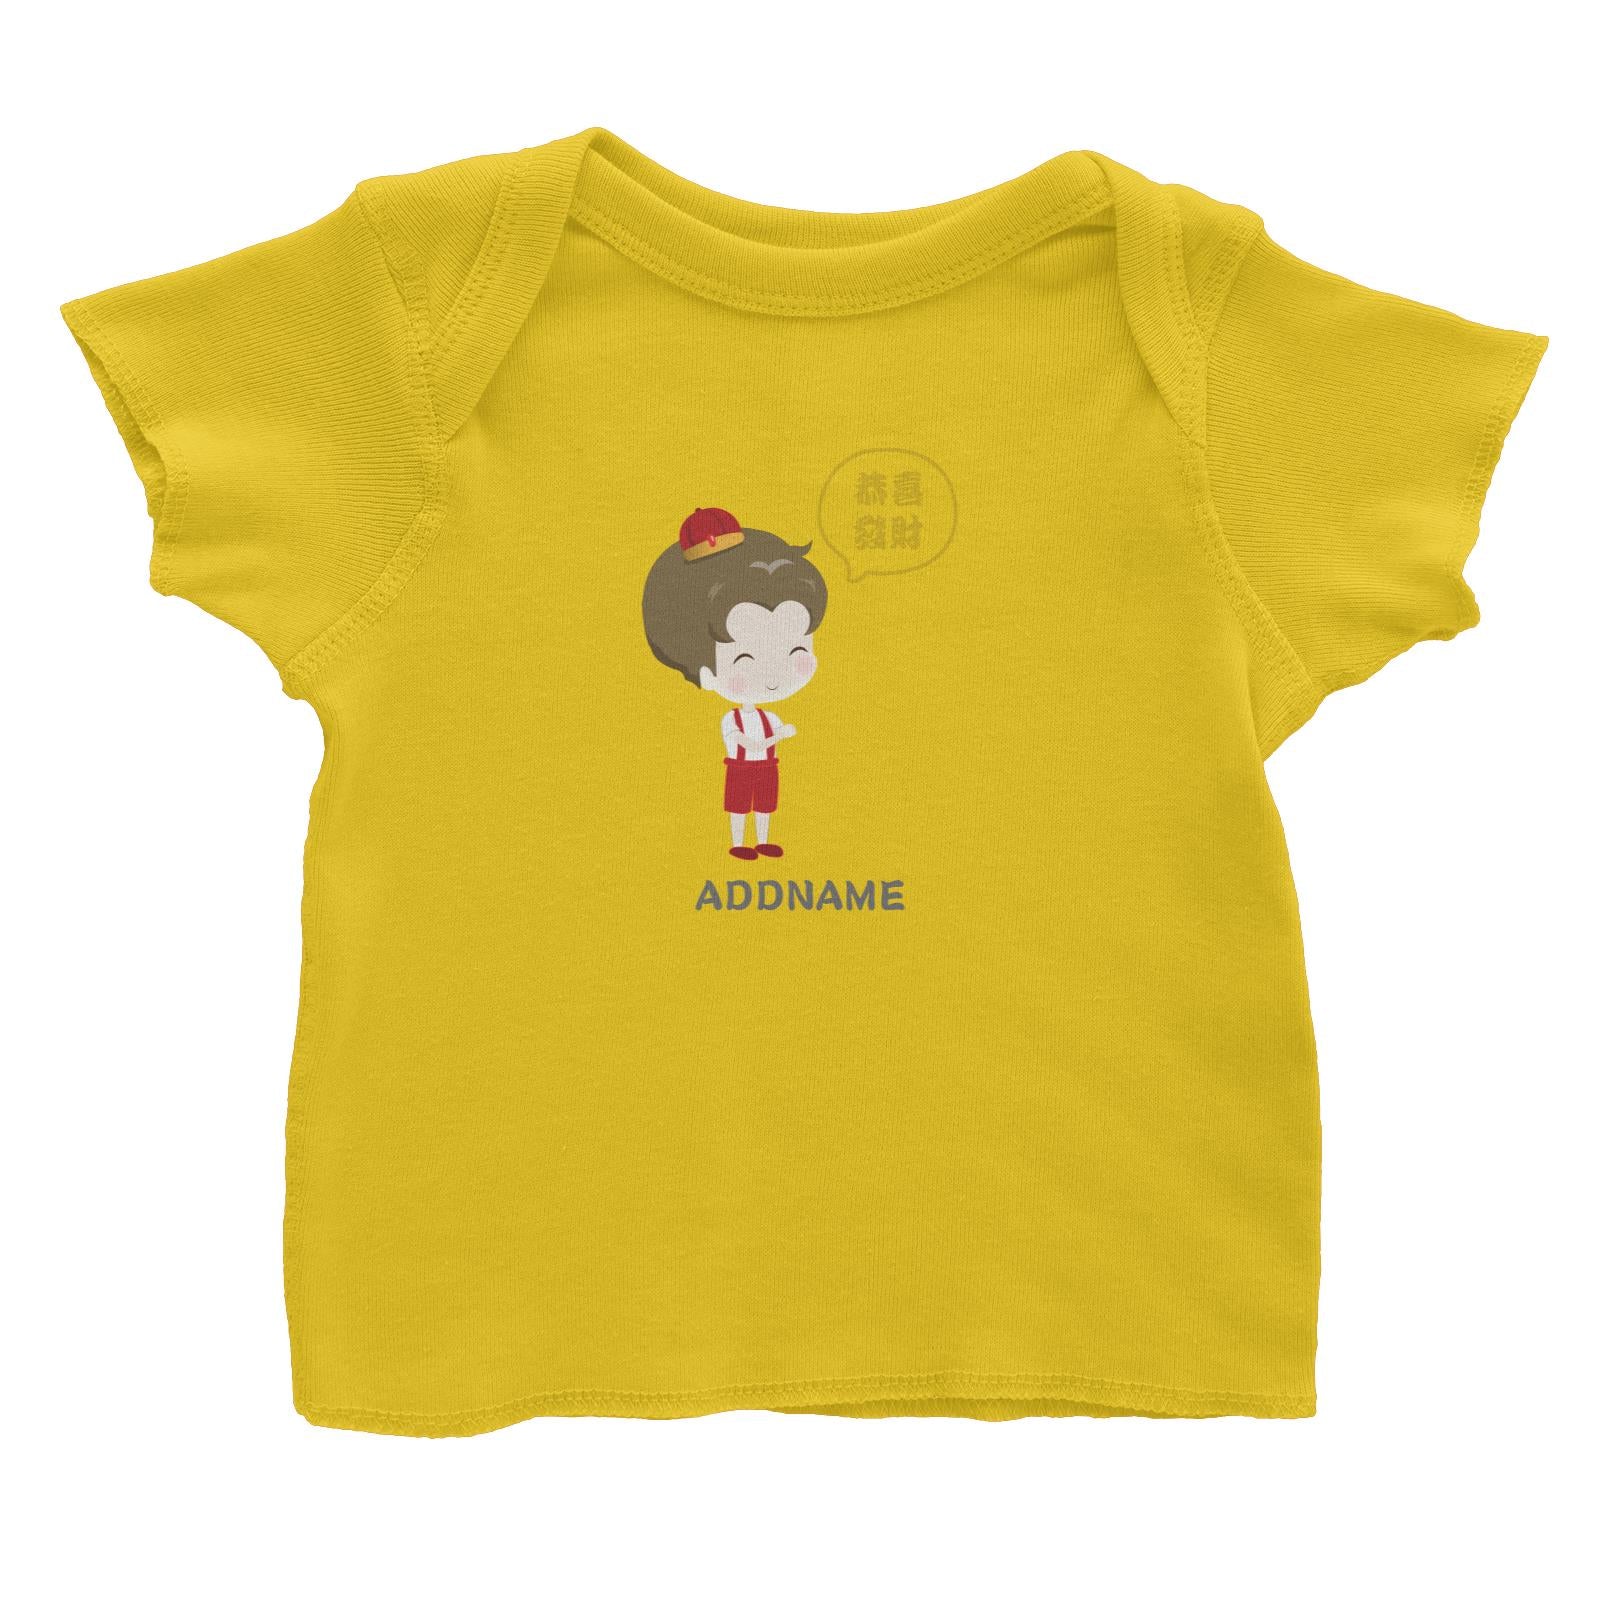 Chinese New Year Family Gong Xi Fai Cai Boy Addname Baby T-Shirt